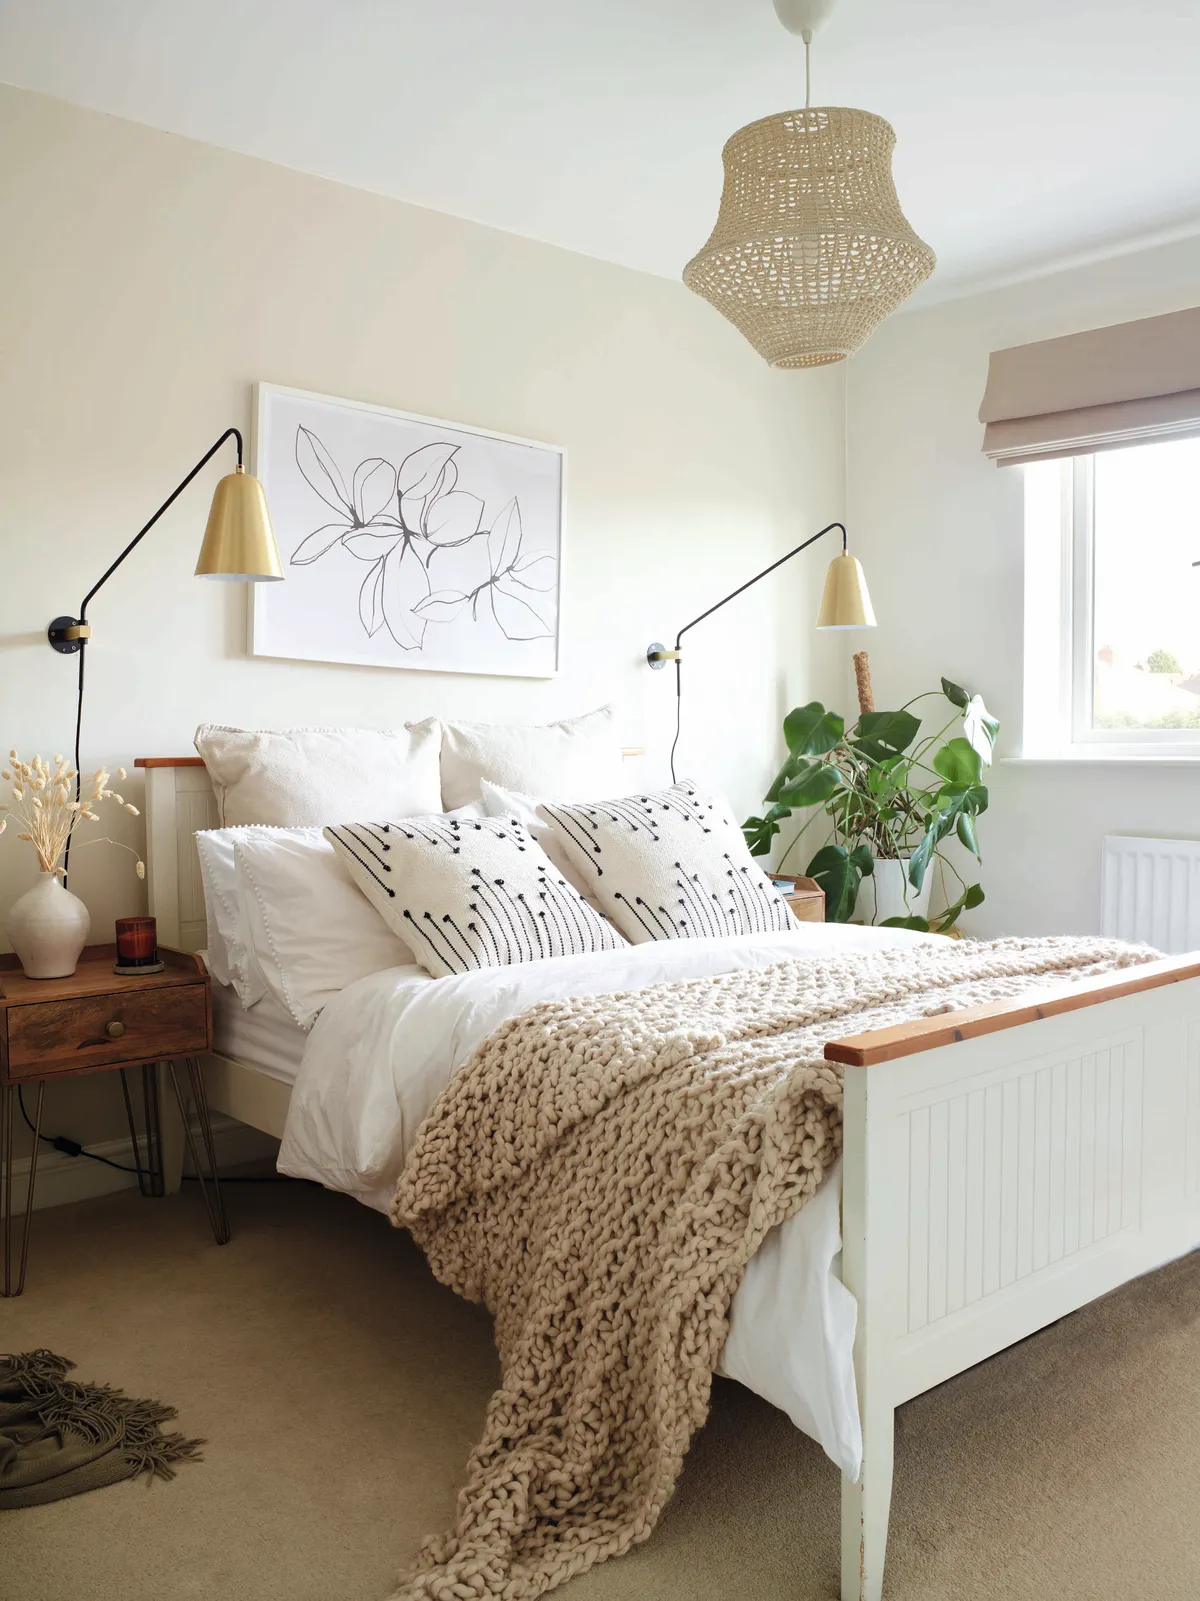 This calm and collected bedroom has been painted in fresh, warm tones while a pair of statement lamps from Lamp and Light bring drama to the room. ‘They make great reading lamps,’ says Melanie